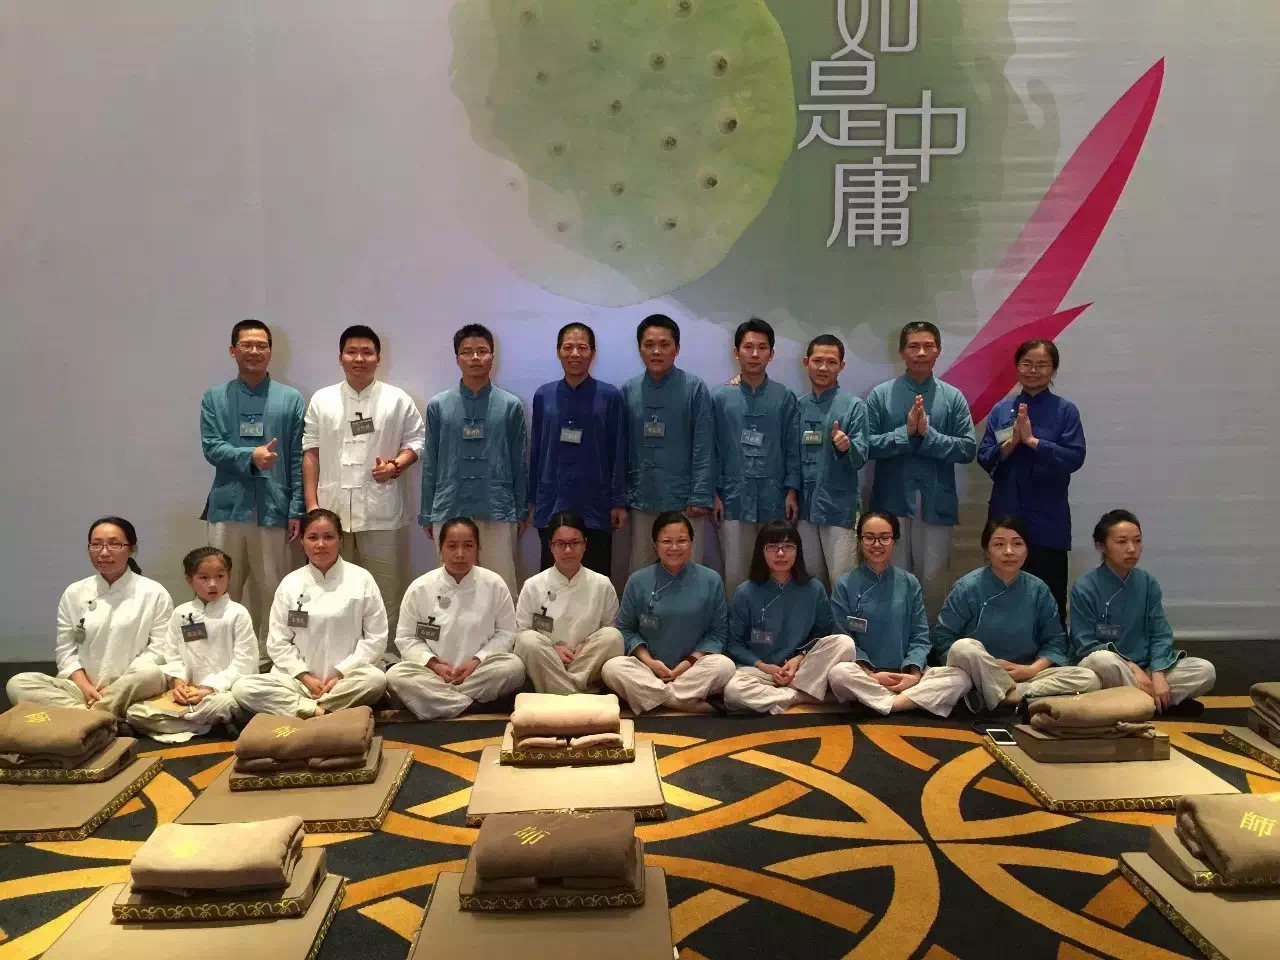 The WISDOM colleagues attended the 27th course of “Ruping's Doctrine of the Mean” in Guangzhou.